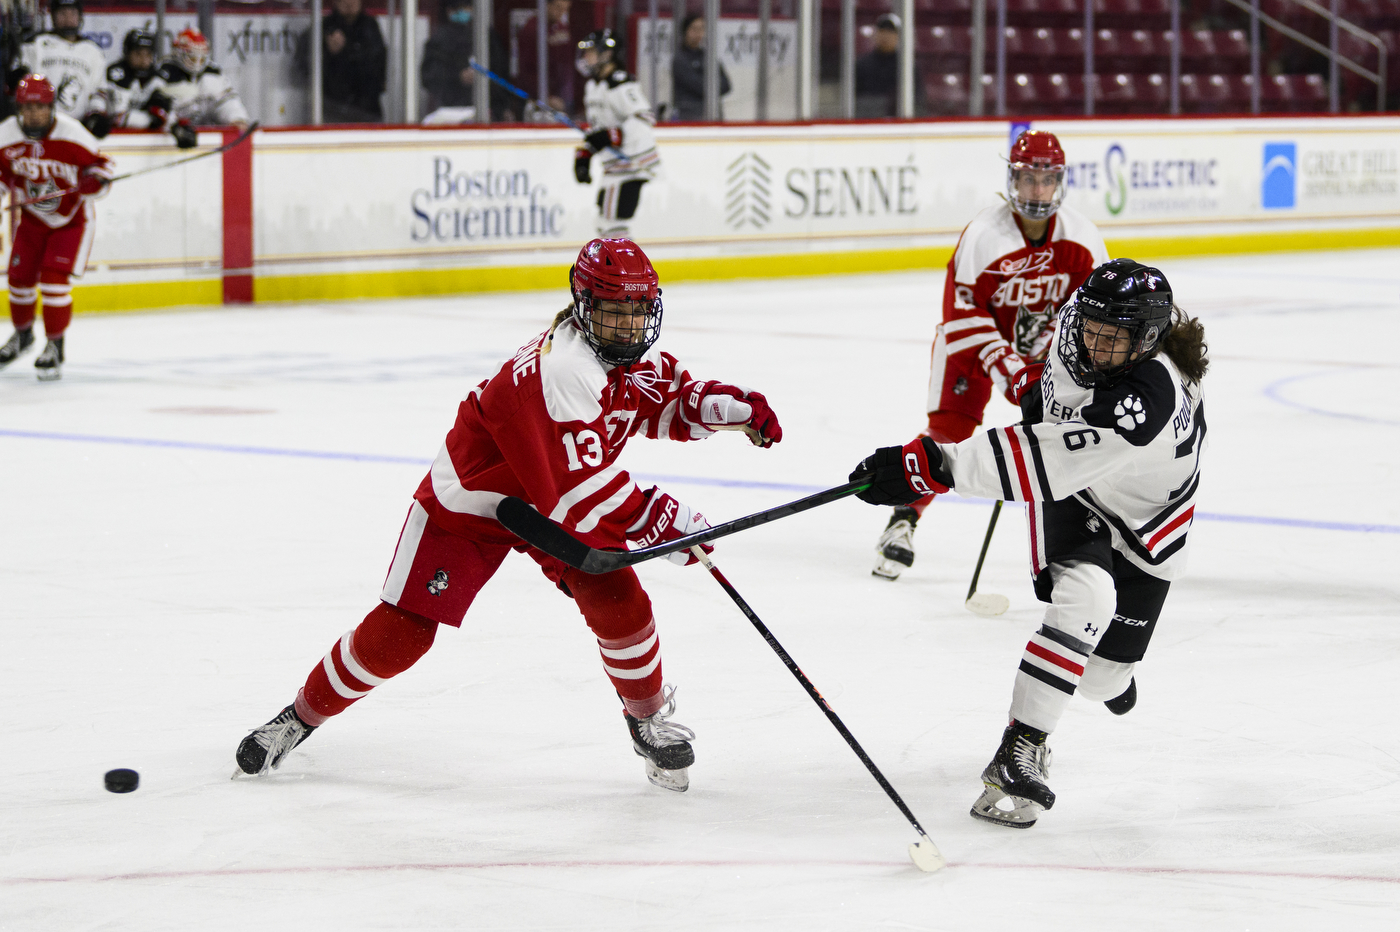 northeastern and BU womens hockey players battling for the puck